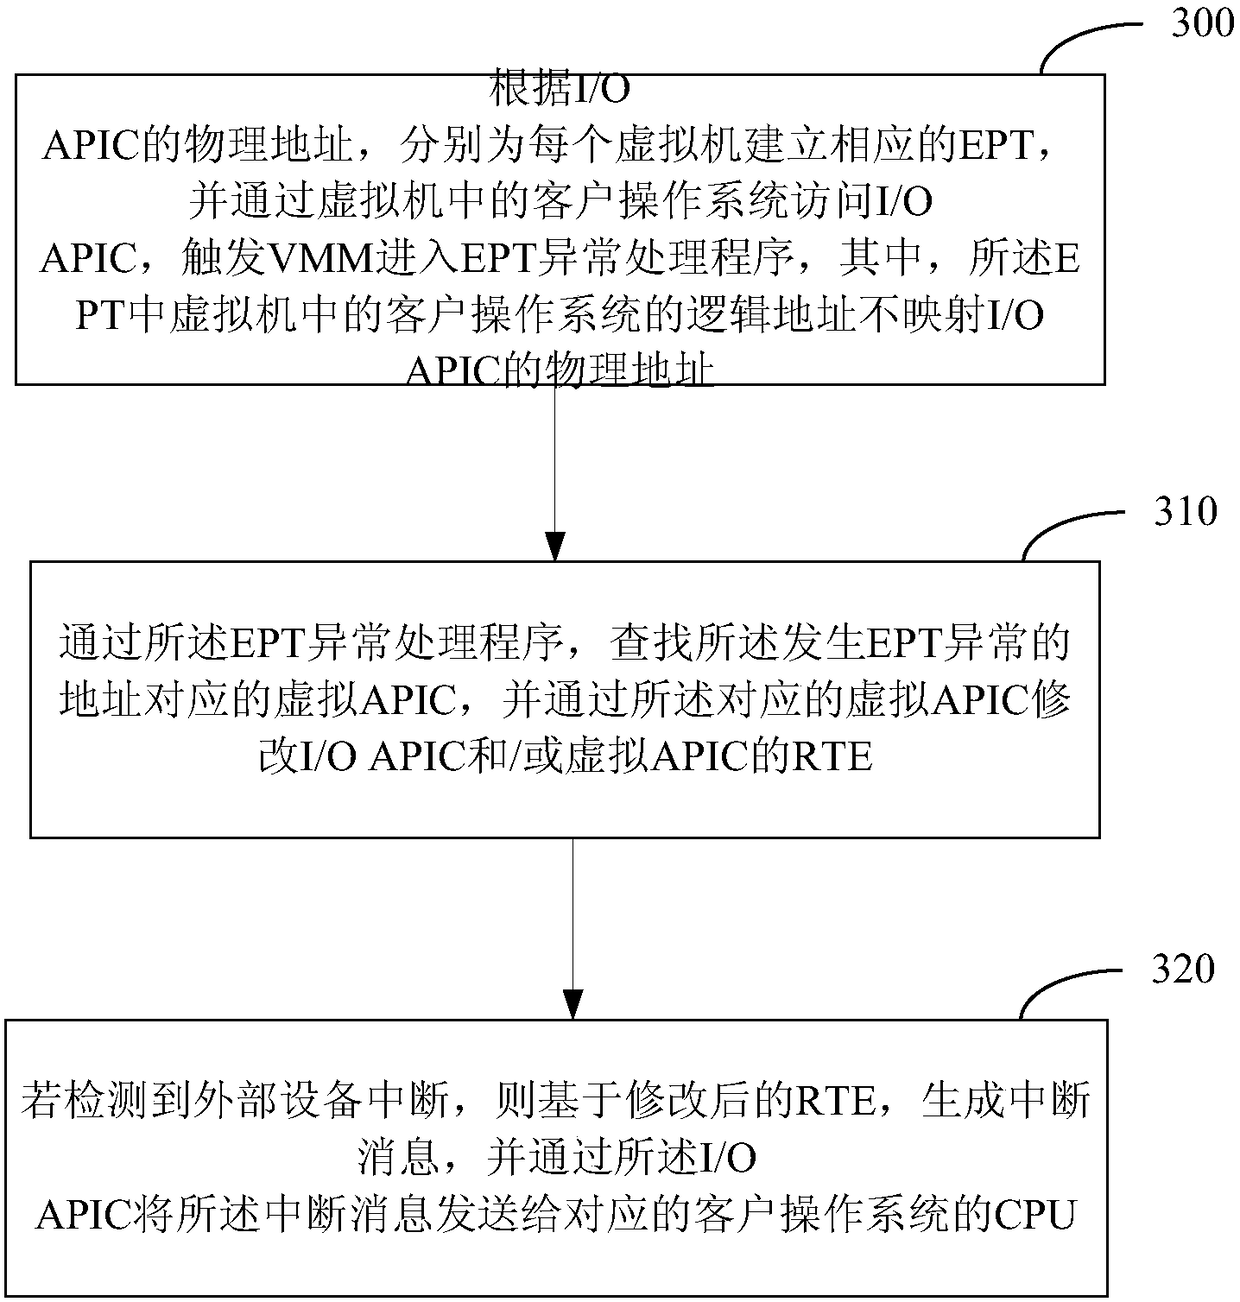 Method and device for interrupt handling between heterogeneous operating systems on multi-core CPU